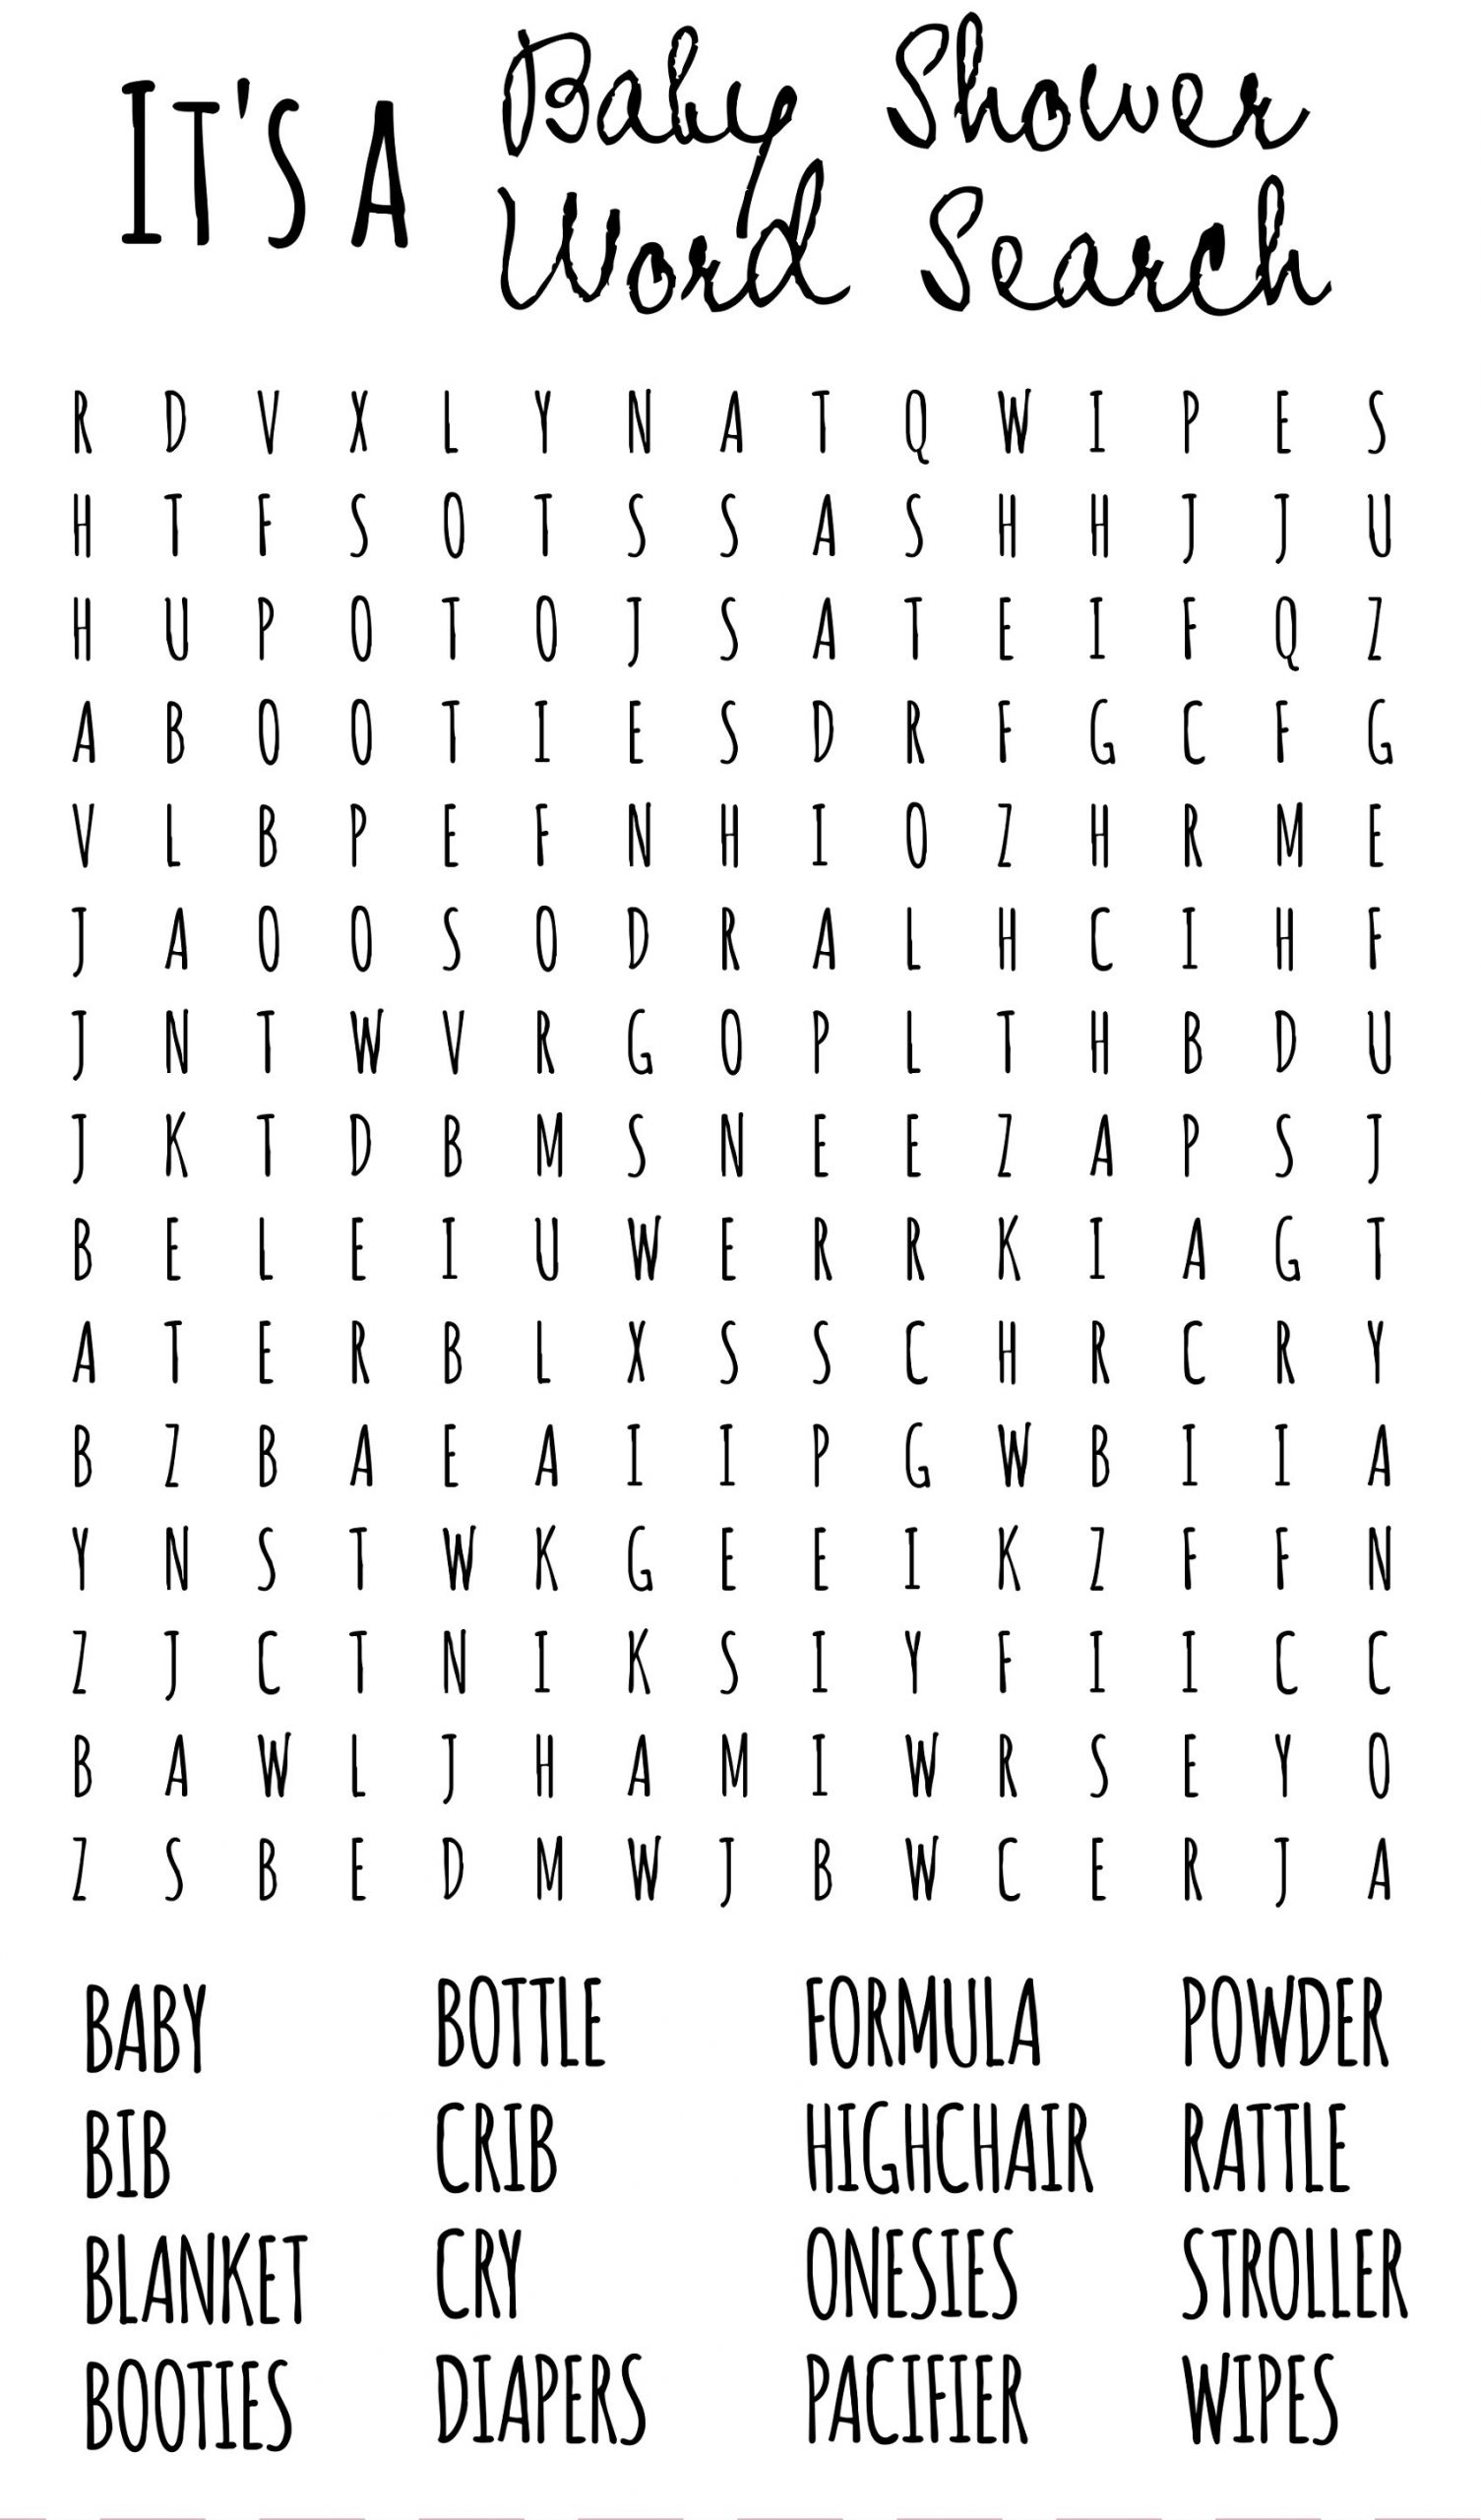 free baby shower games printable worksheets word search